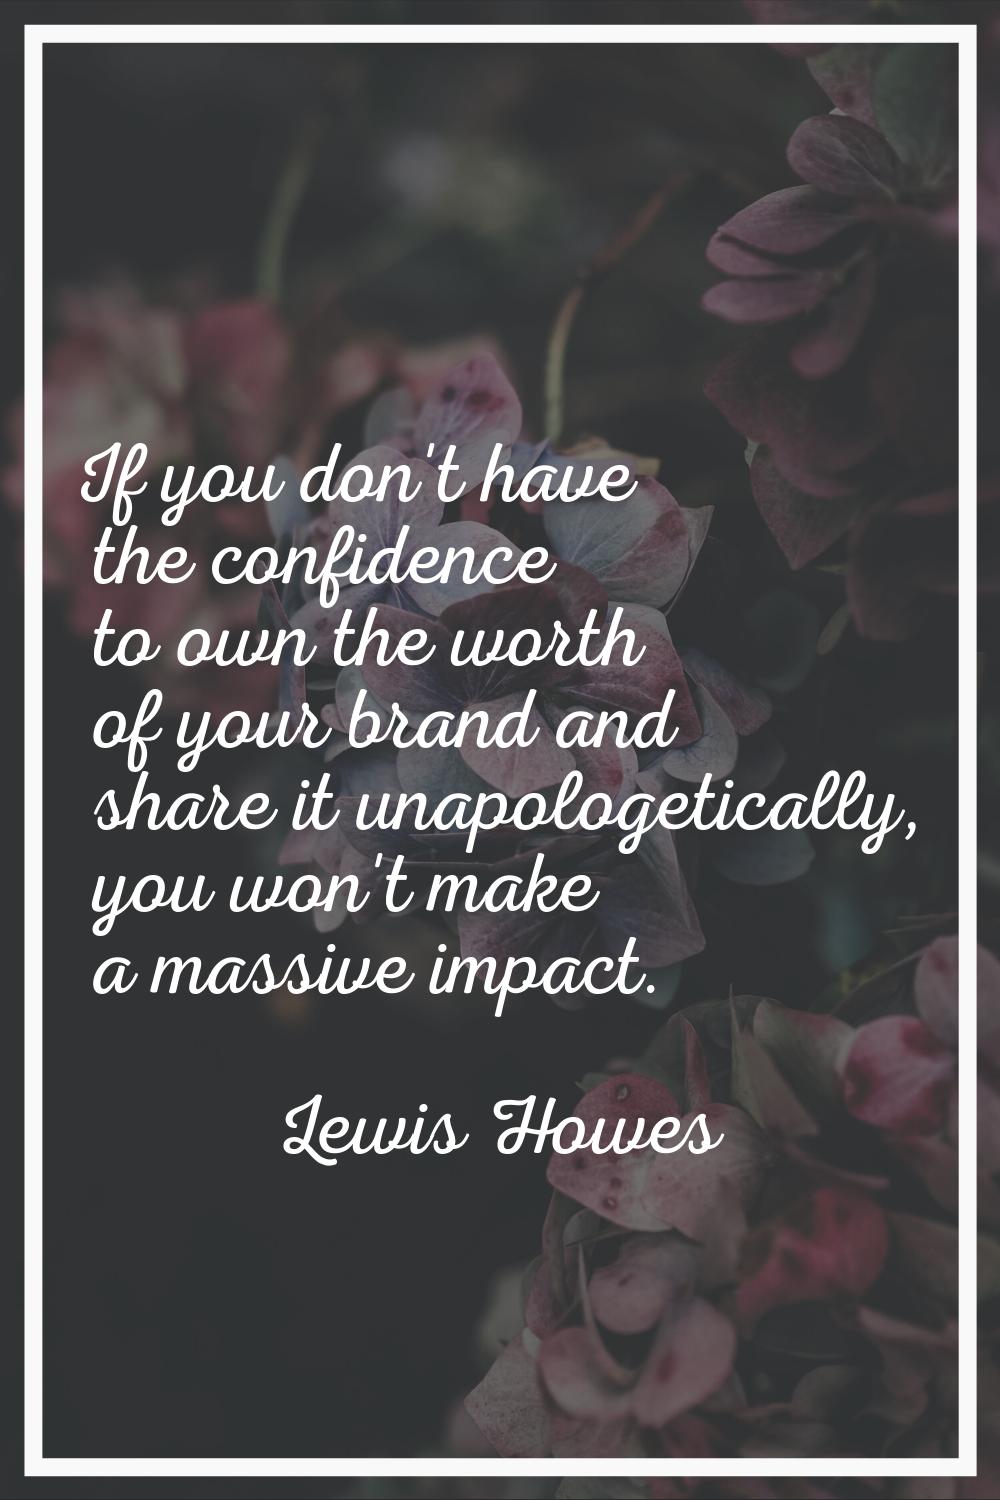 If you don't have the confidence to own the worth of your brand and share it unapologetically, you 